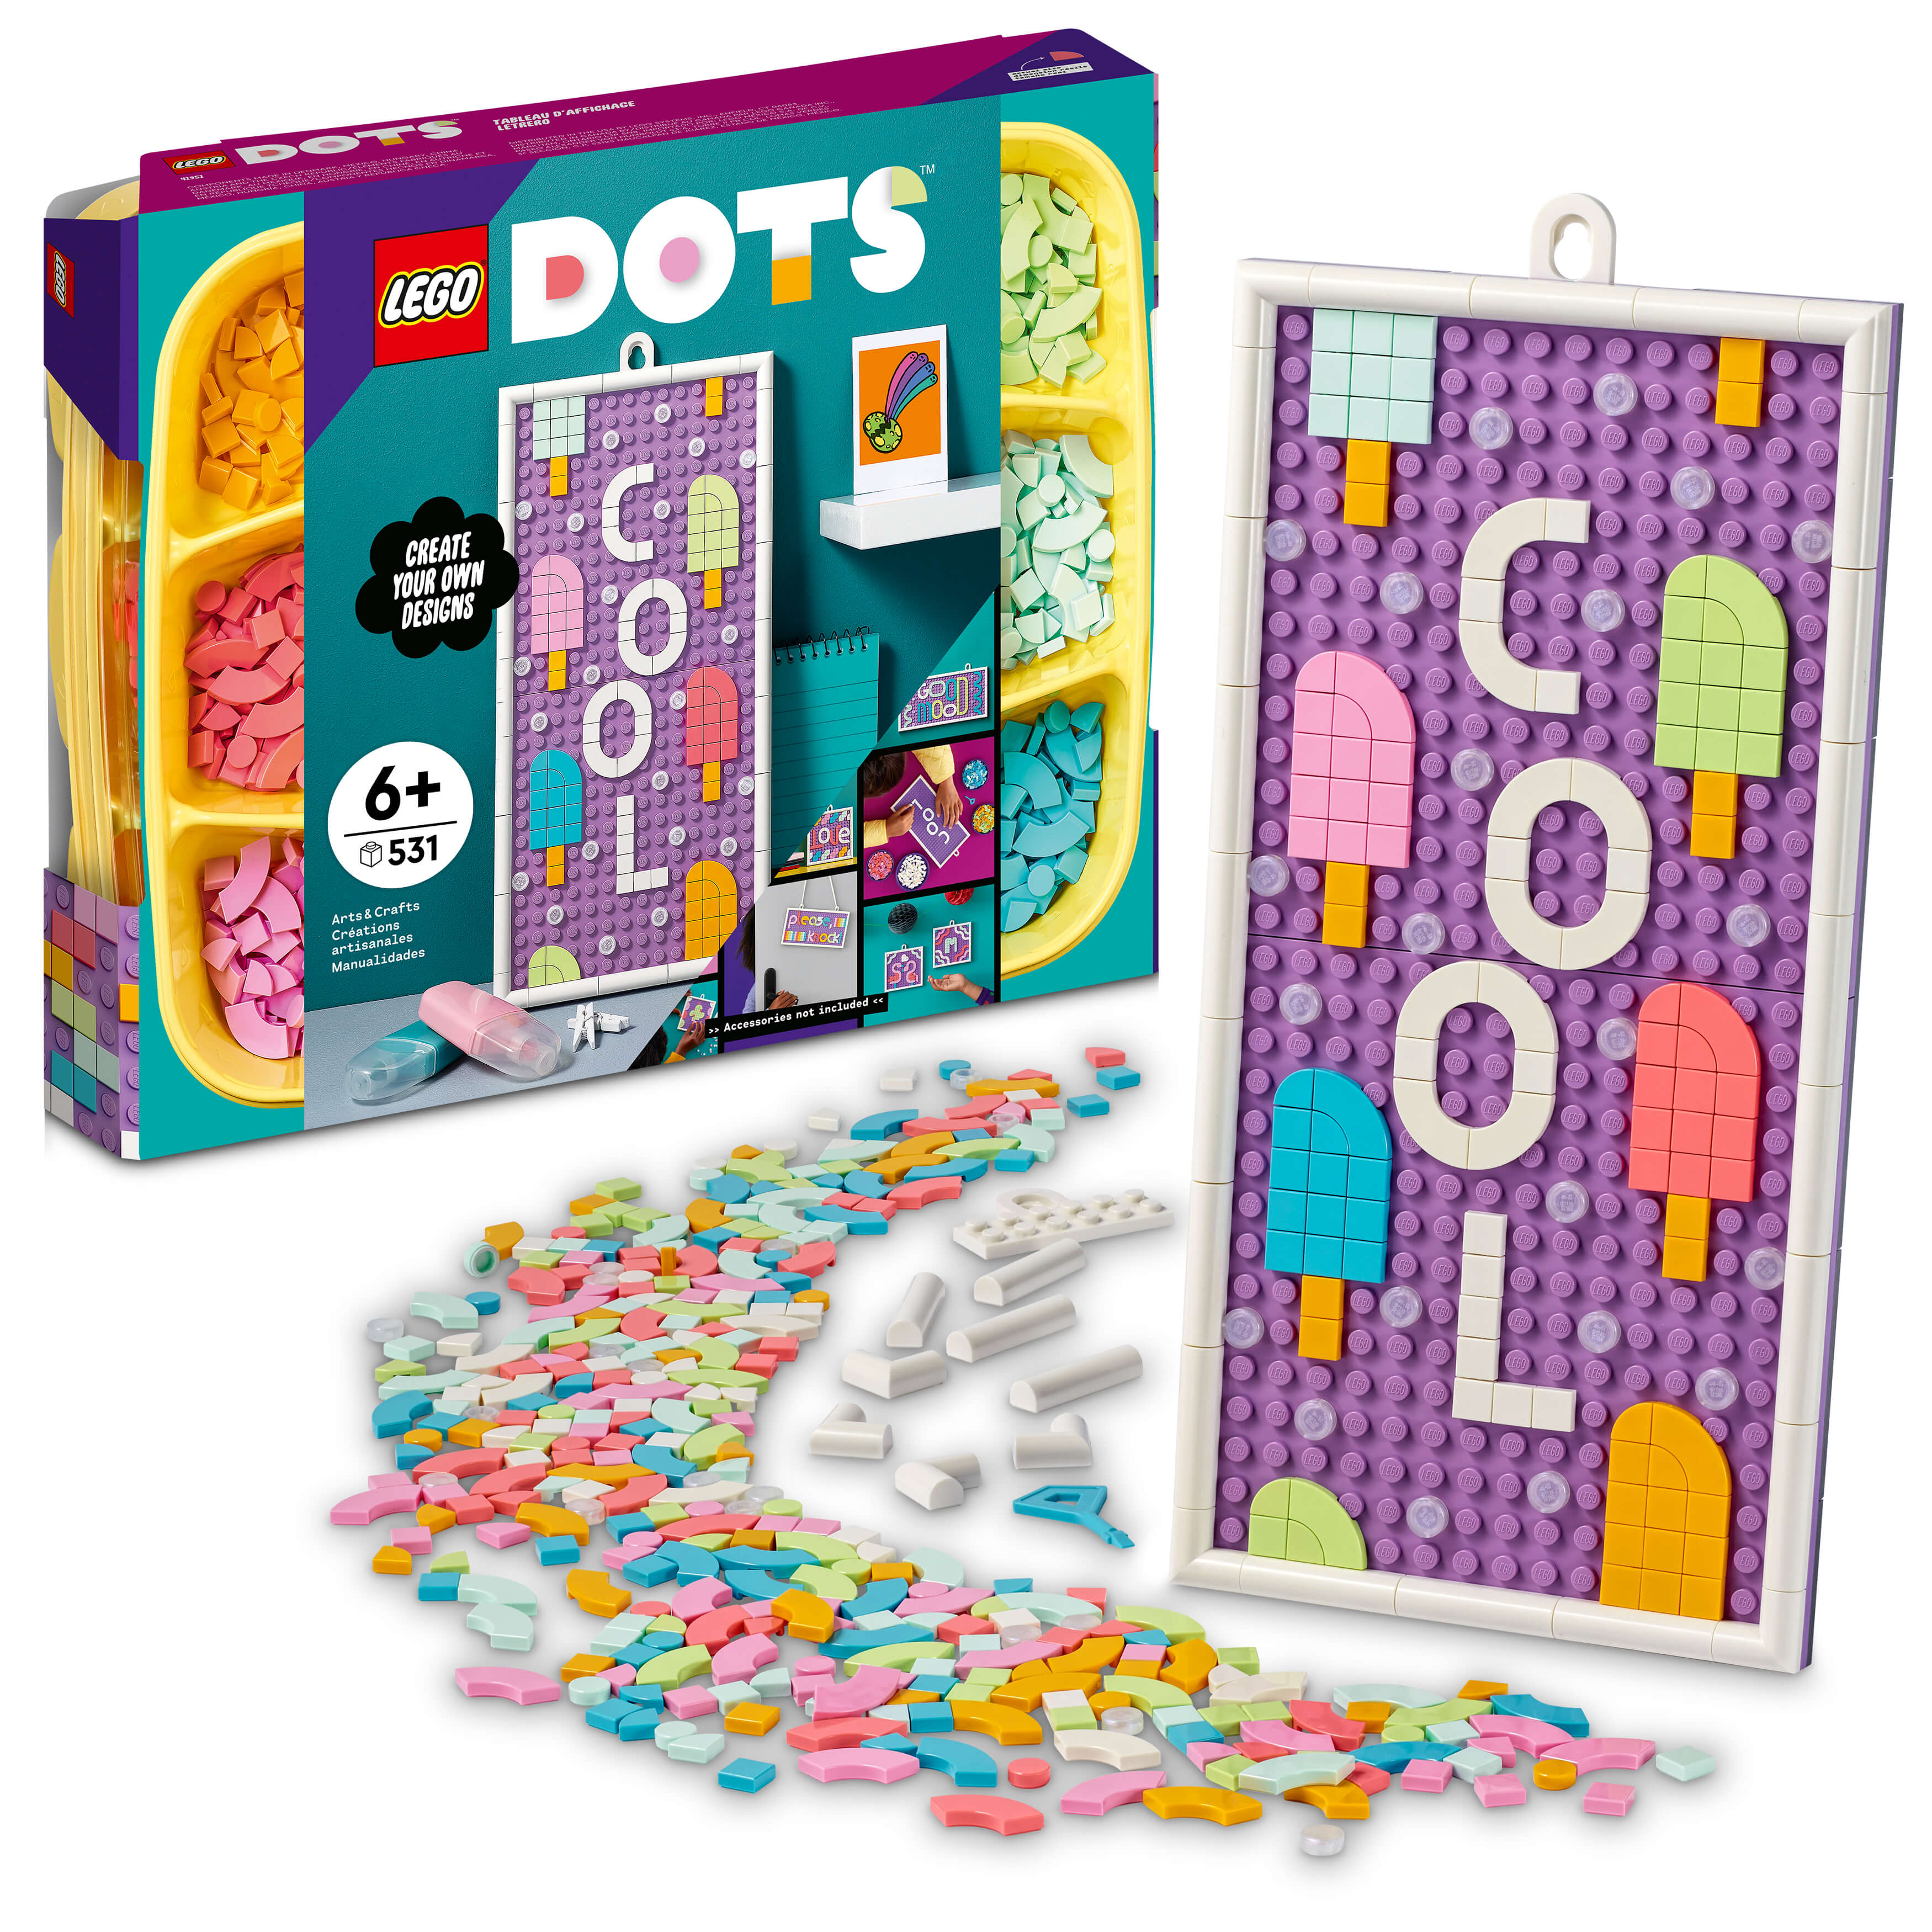 LEGO® DOTS Message Board 41951 DIY Craft Decoration Kit (531 Pieces)